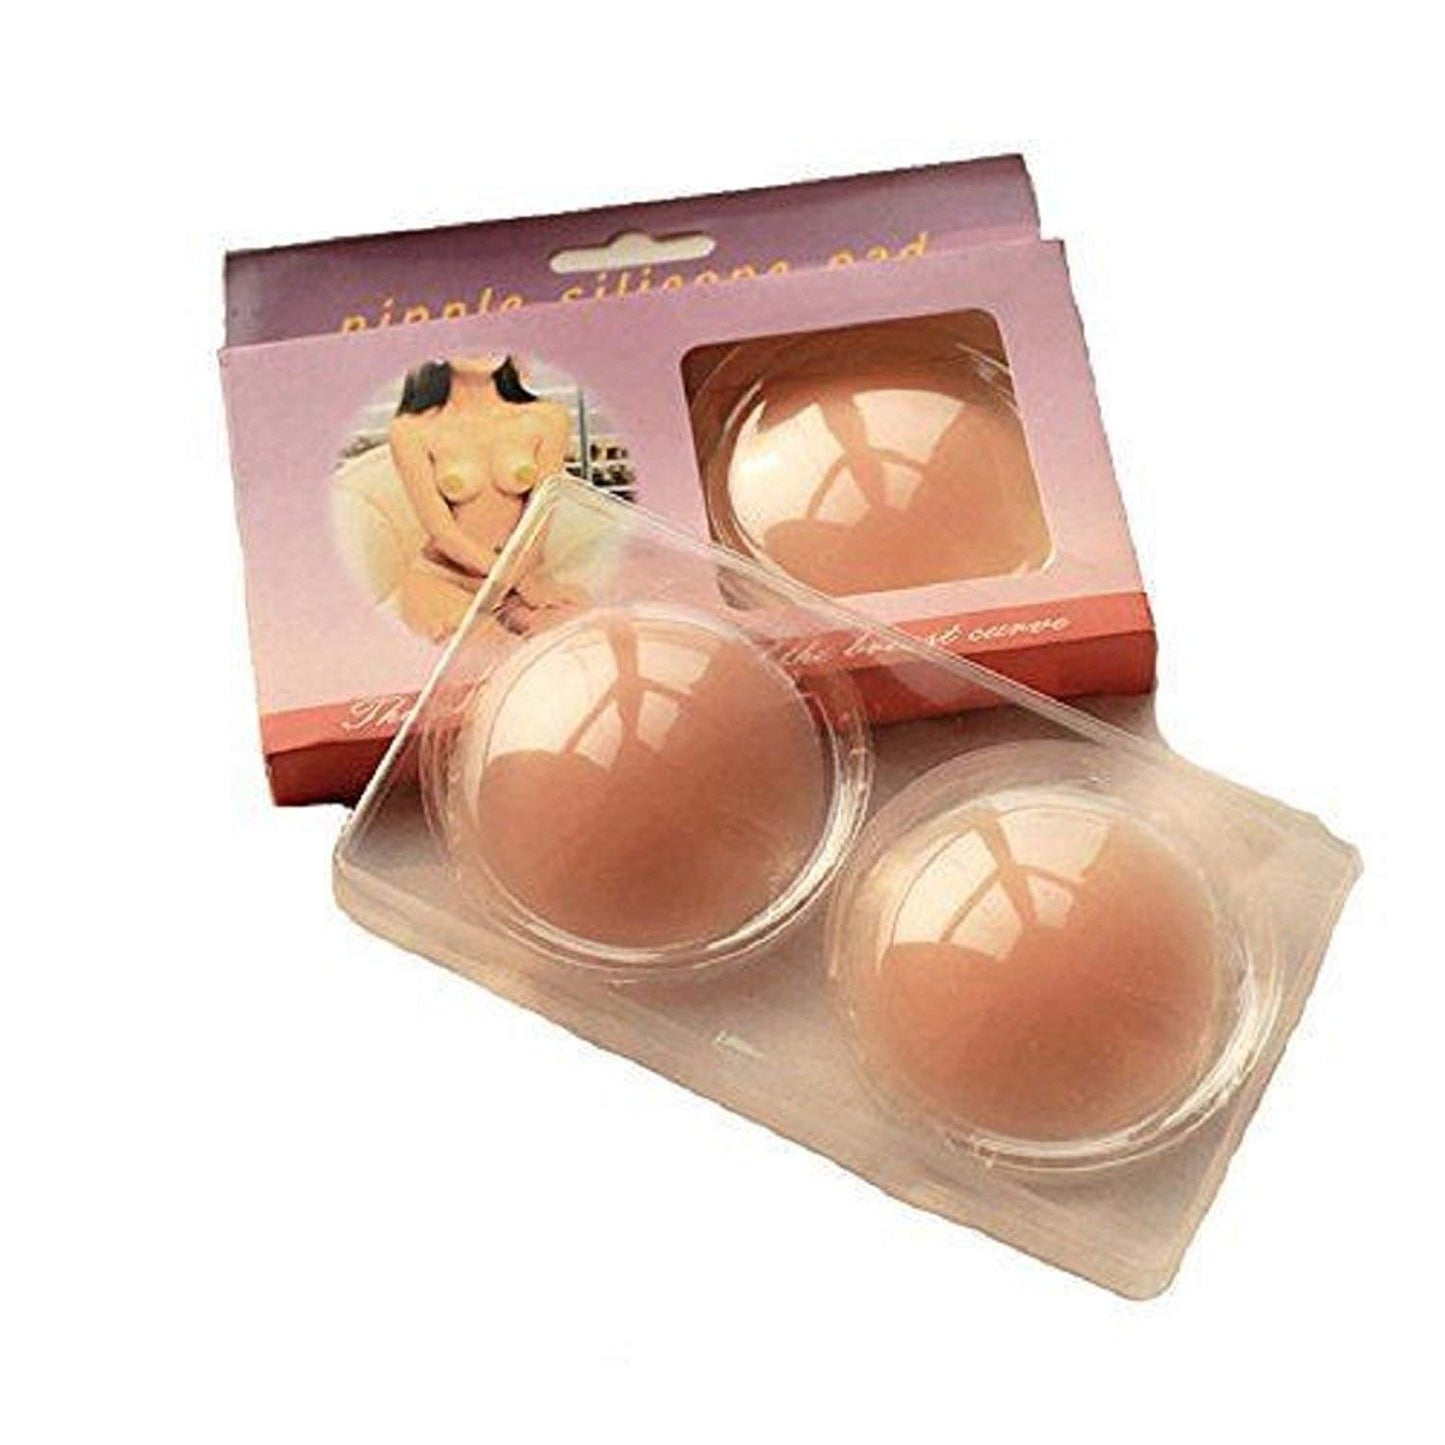 Women's Silicone Nipple Covers with Synthetic Round Shape - Importikaah